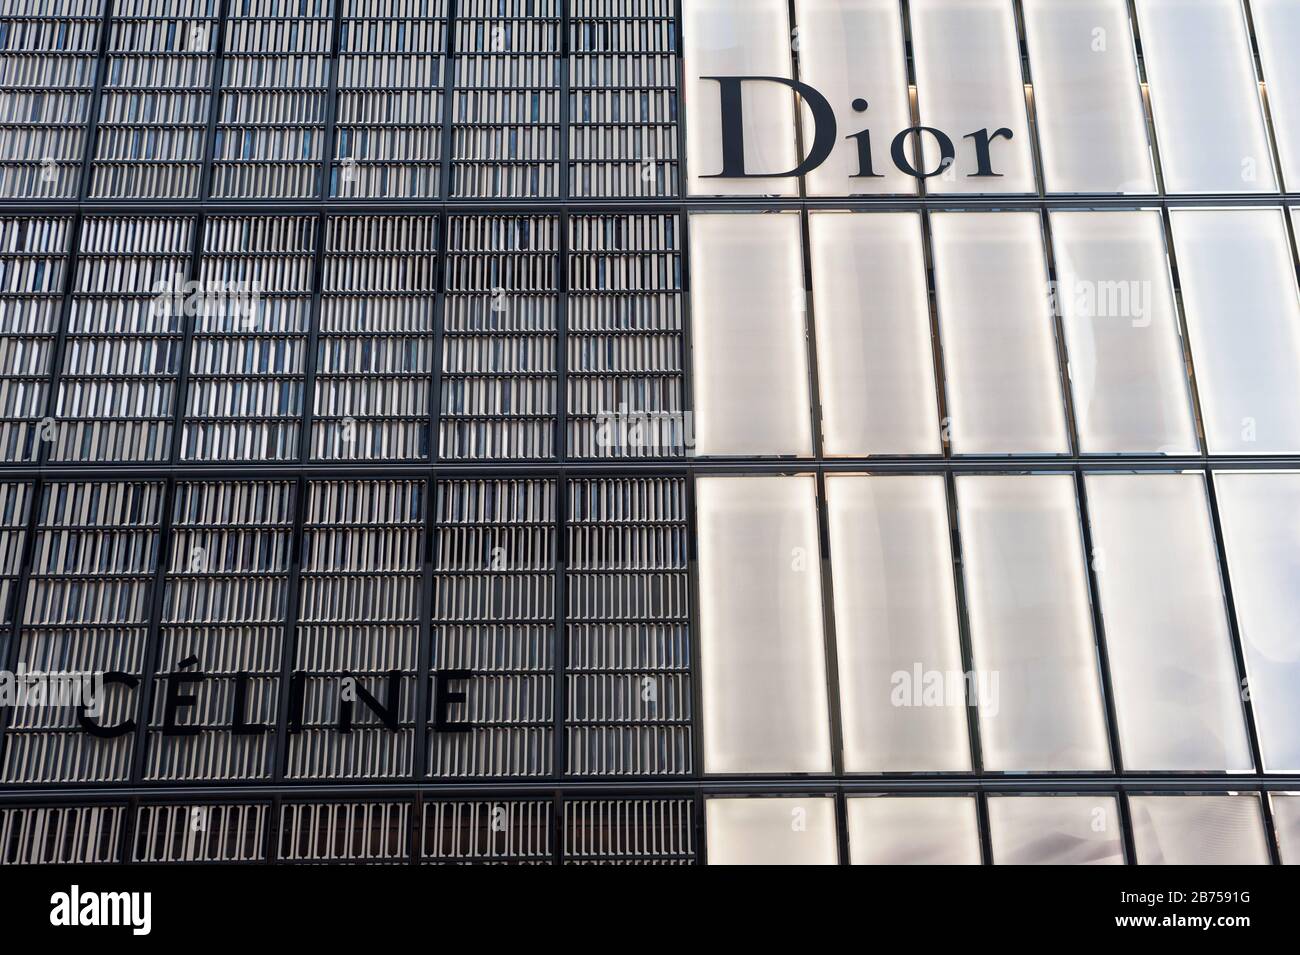 01.01.2018, Tokyo, Japan, Asia - Company logos of Dior and Celine on building facades in the Ginza district of the Japanese capital. [automated translation] Stock Photo